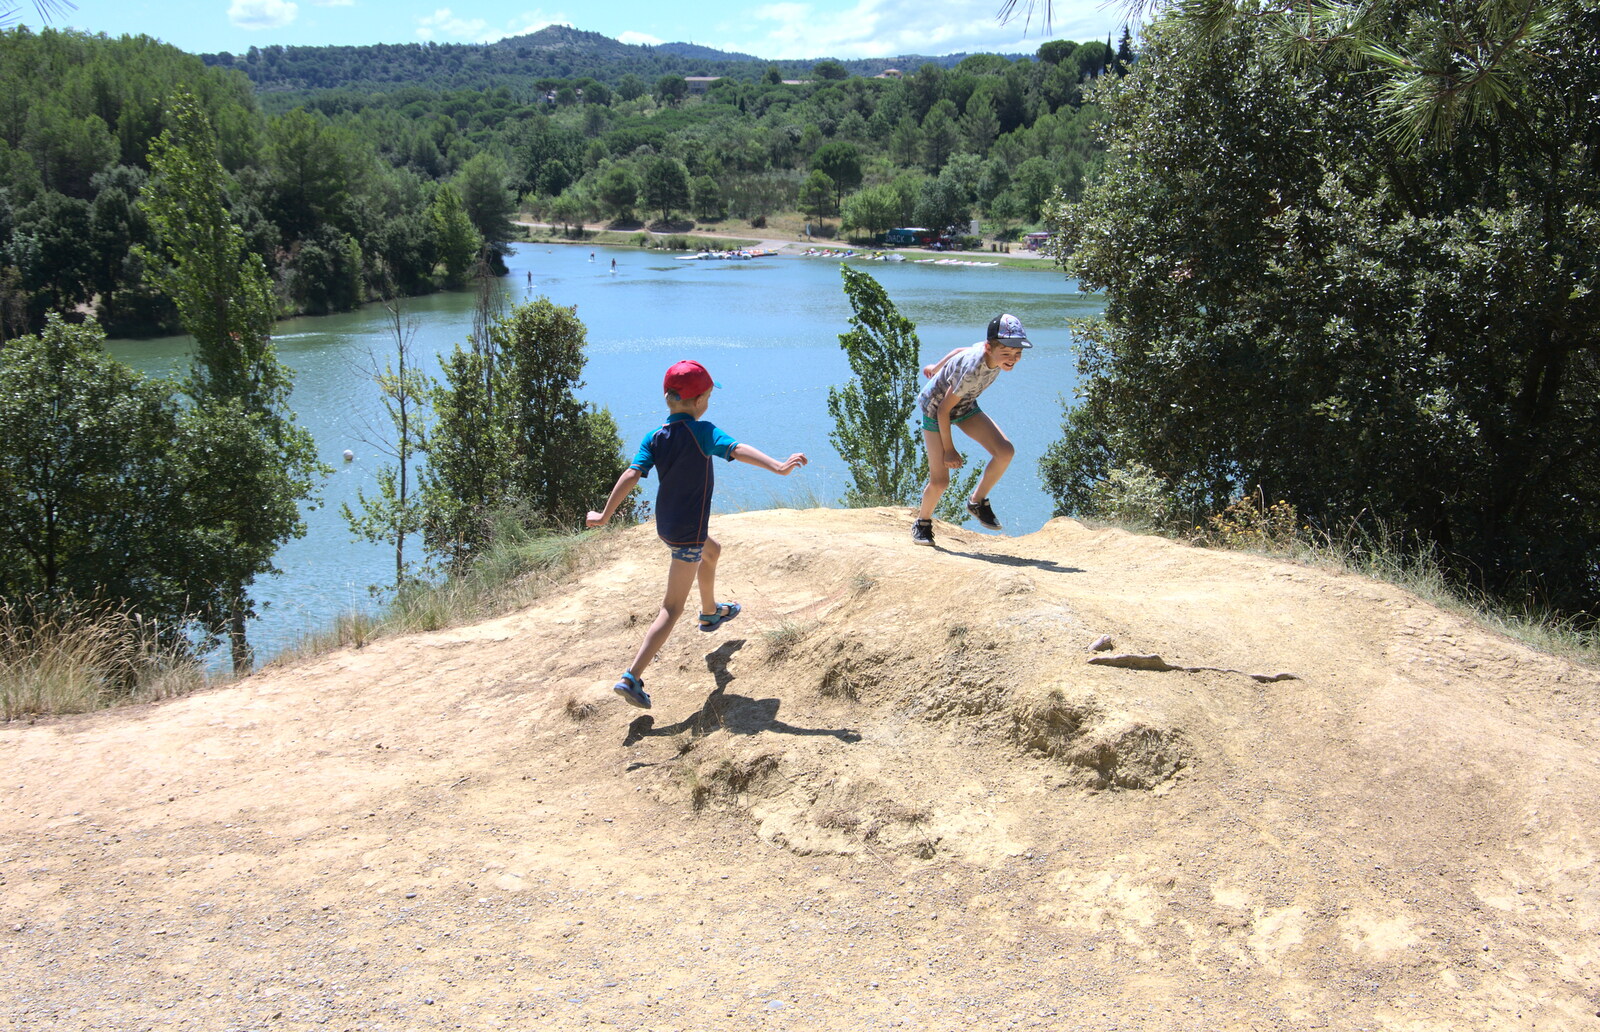 The boys run around on top of a hill from Abbaye Sainte-Marie de Lagrasse and The Lac de la Cavayère, Aude, France - 10th August